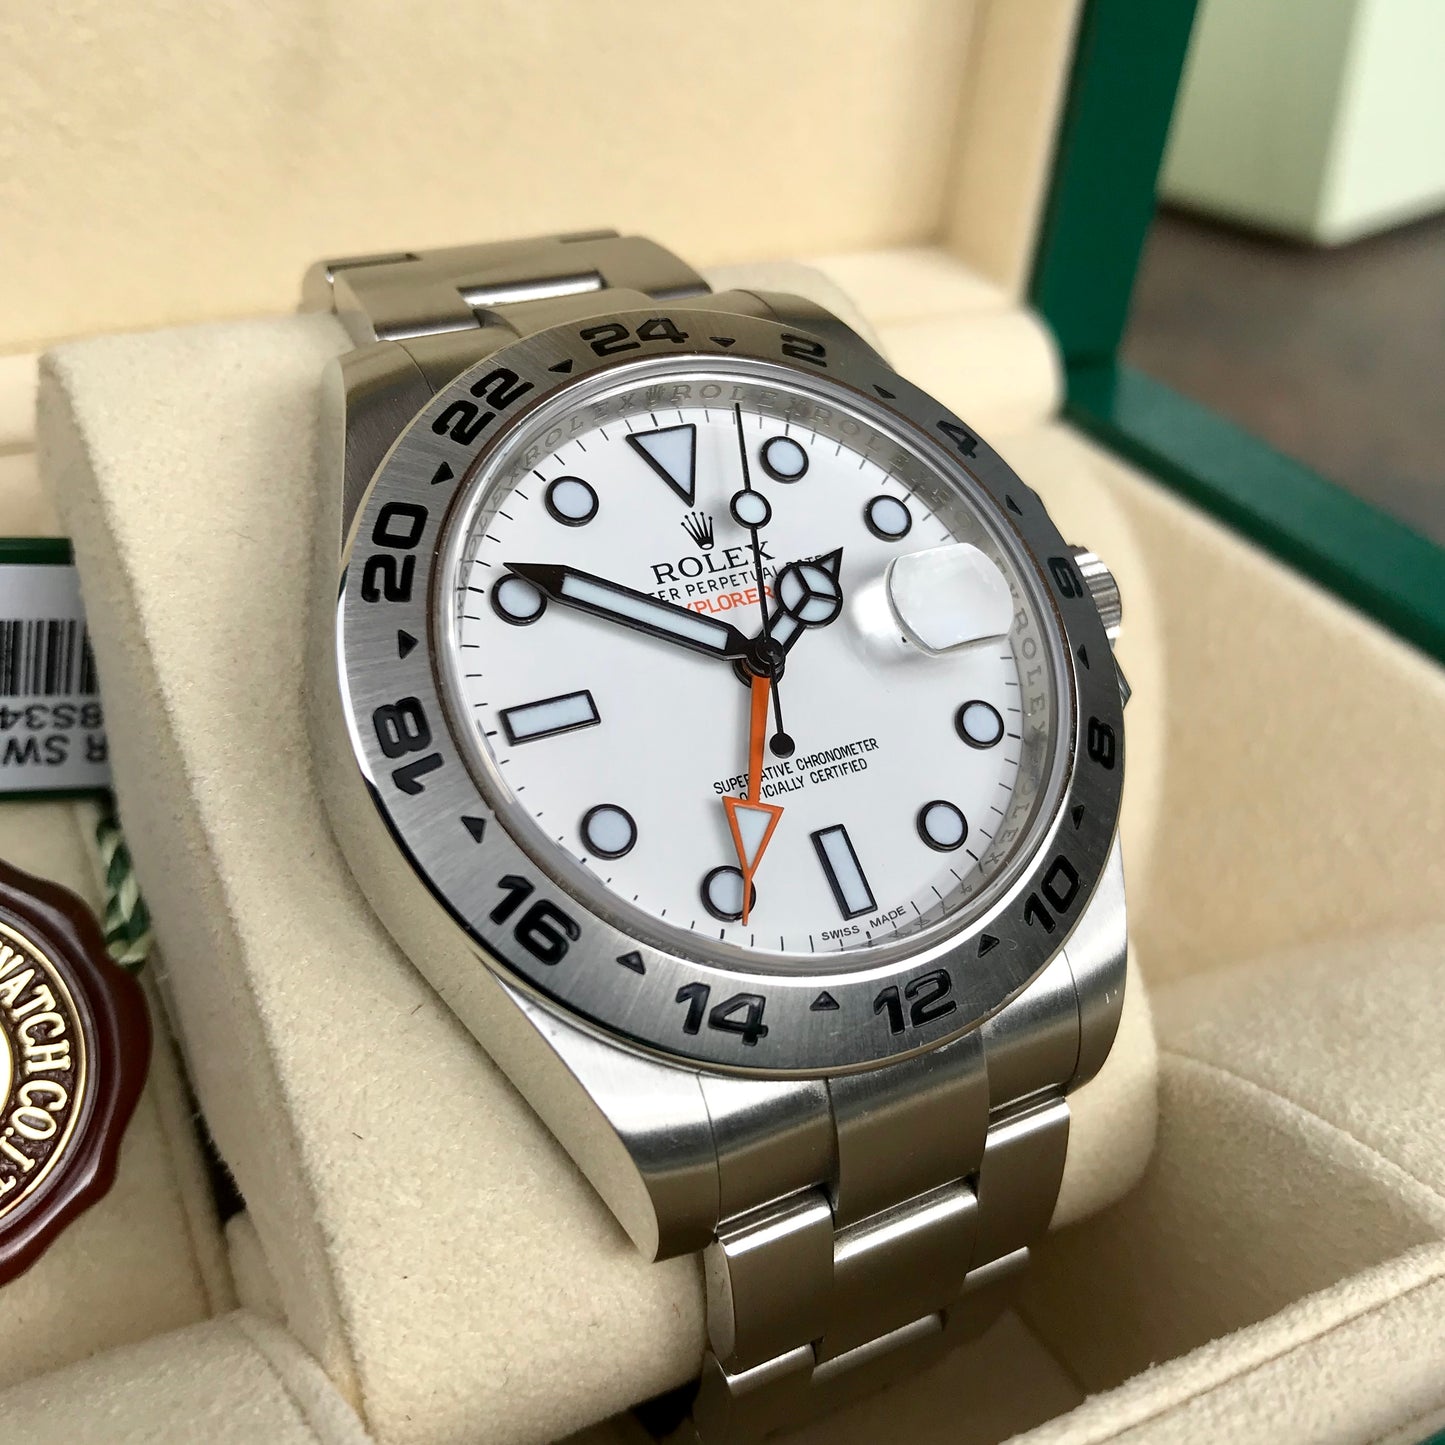 Rolex Explorer II 216570 White GMT Oyster Stainelss Steel Wristwatch Box & Papers Random Serial - Hashtag Watch Company